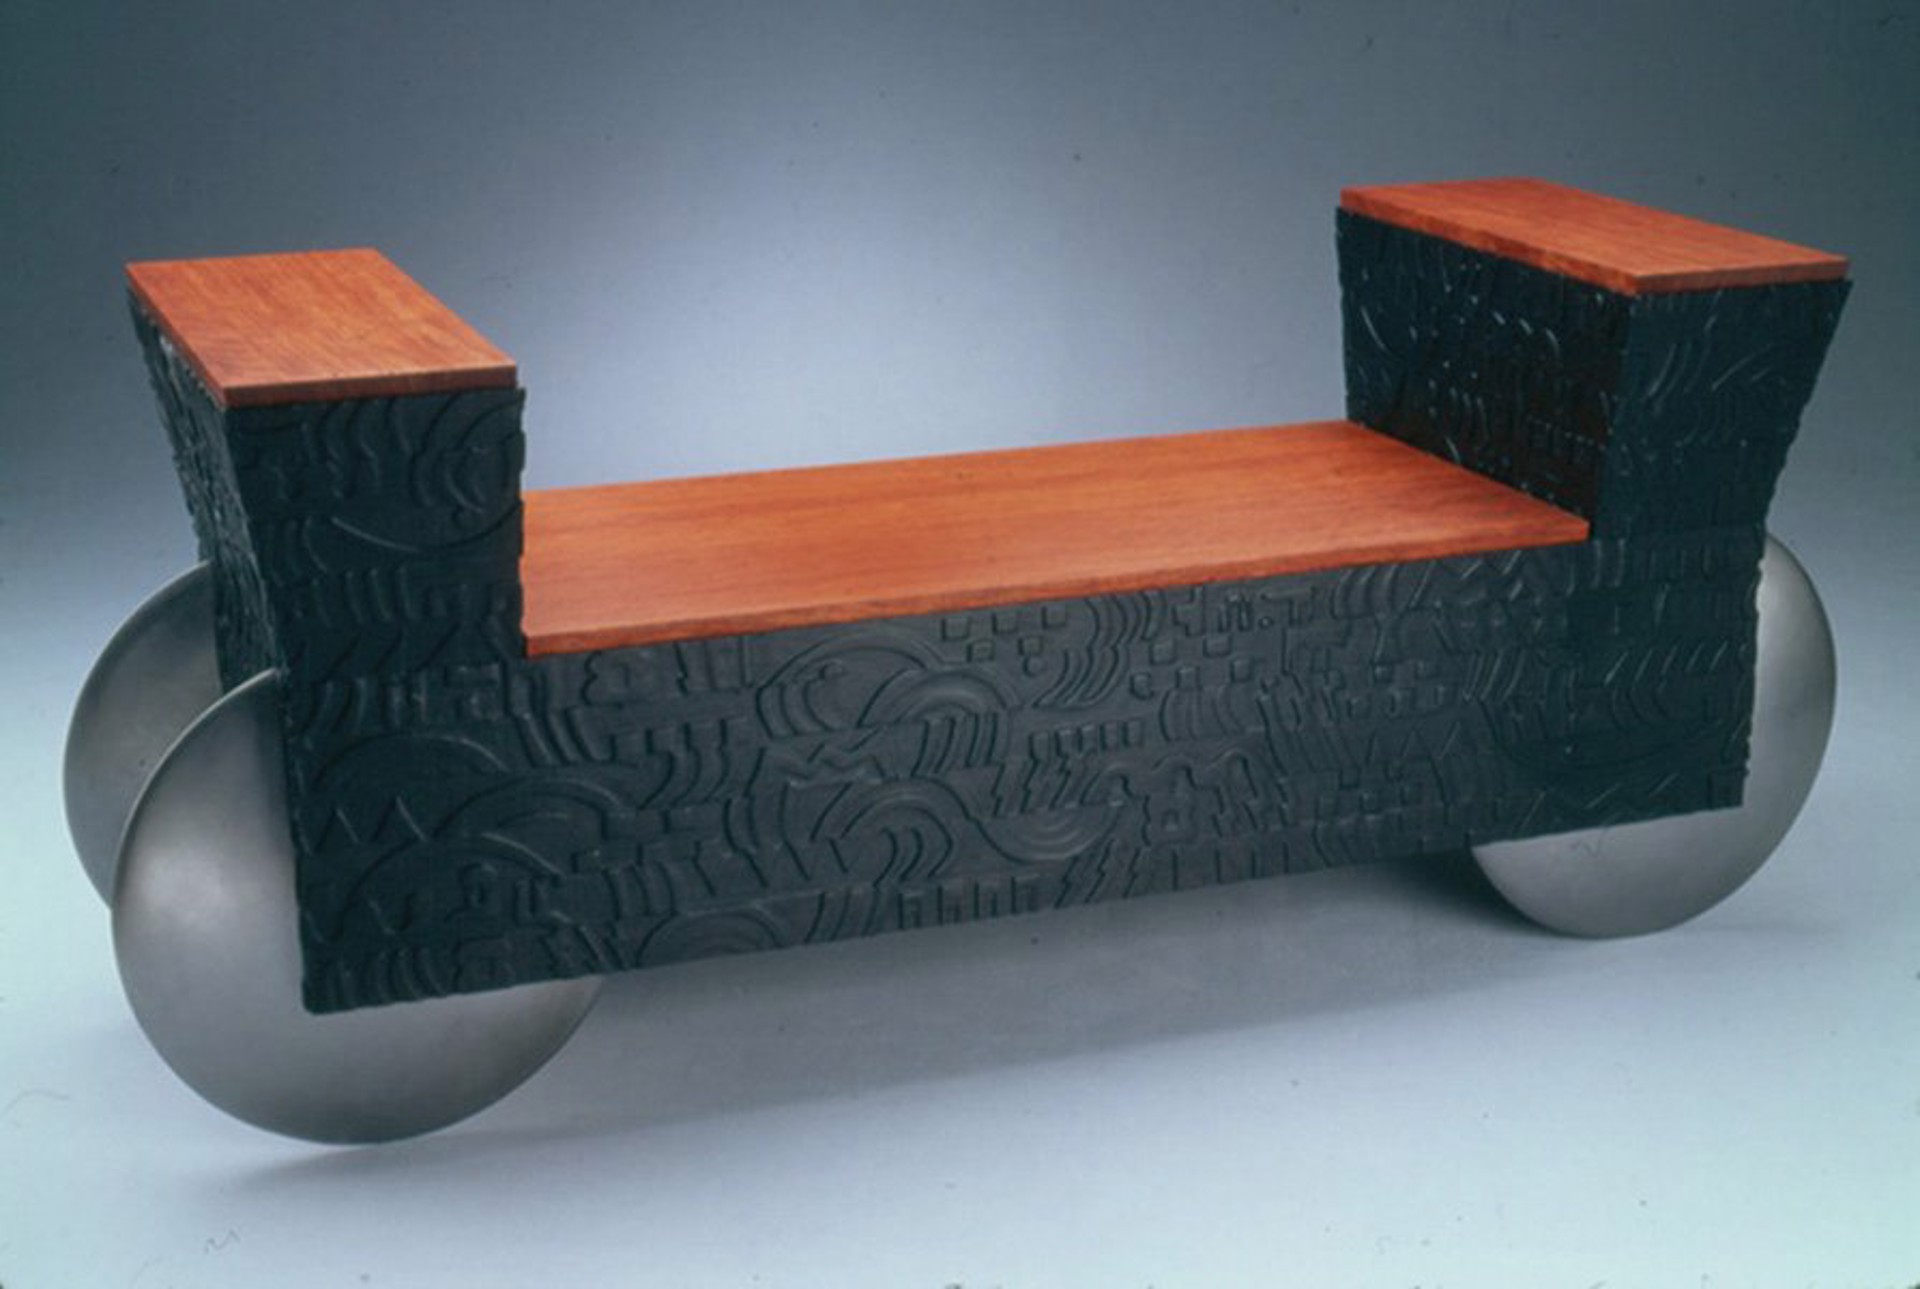 Relief Bench by Tim O'Neill